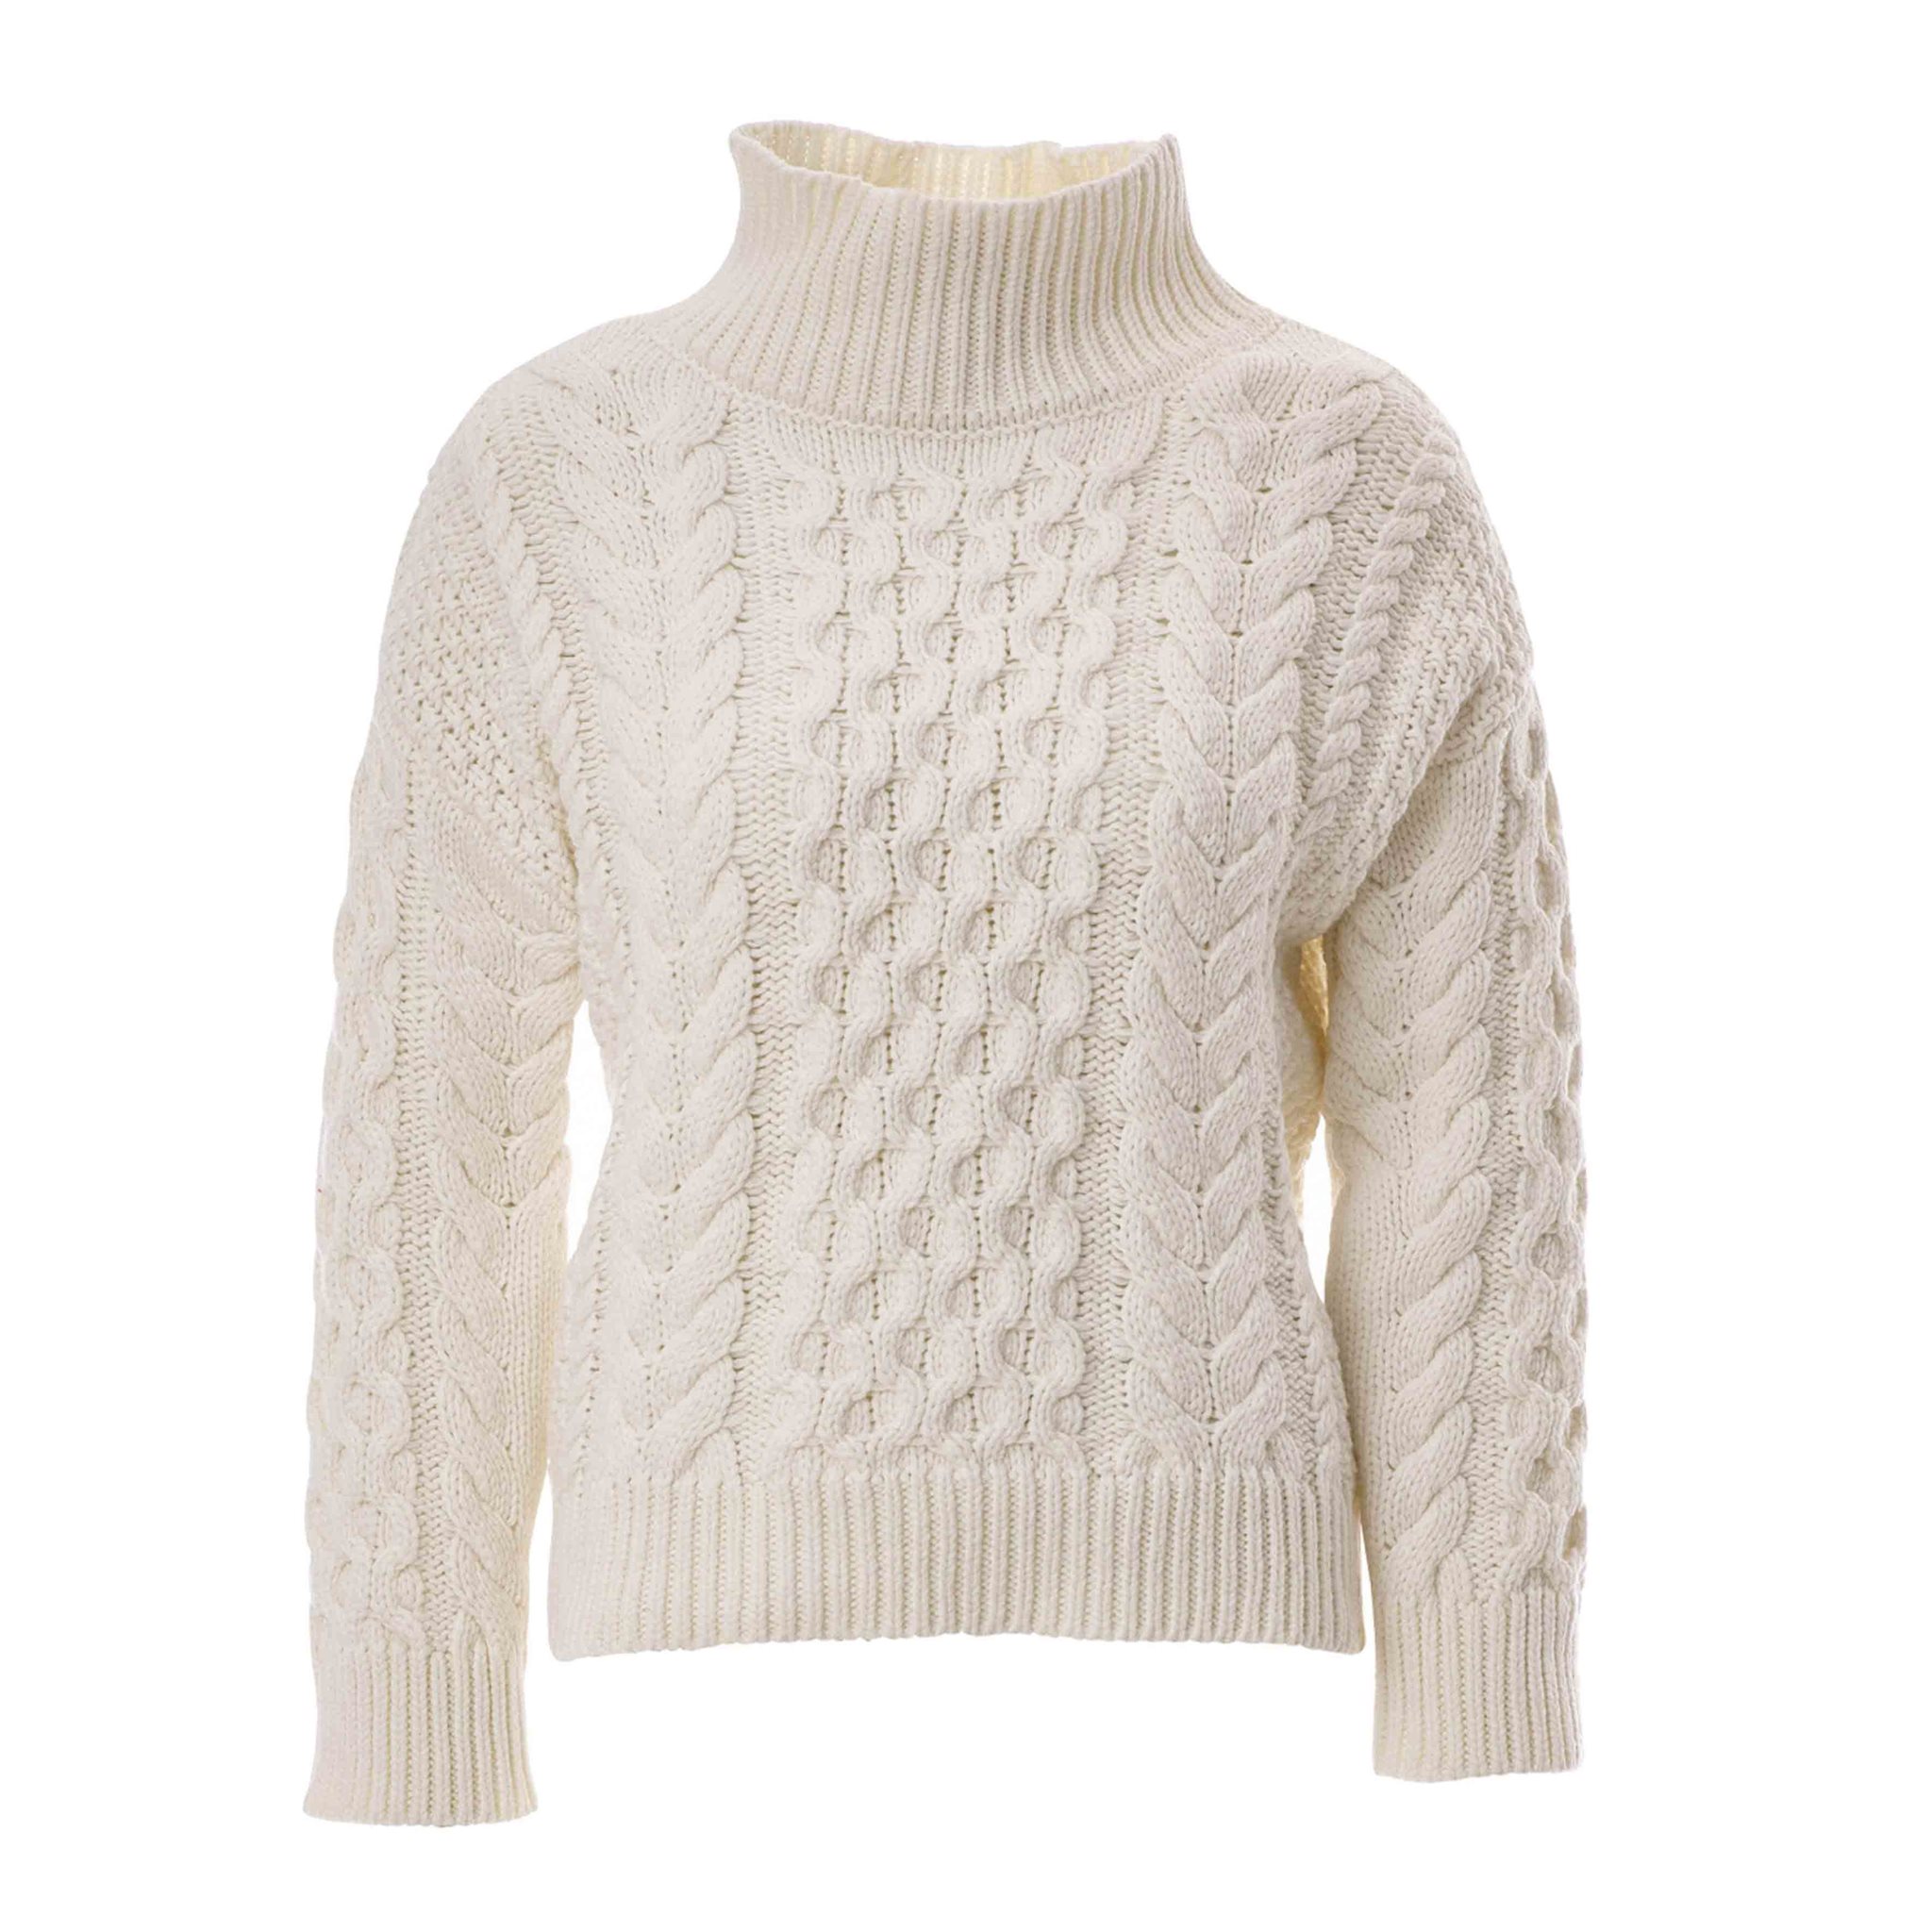 Pia sweater Jc SOPHIE